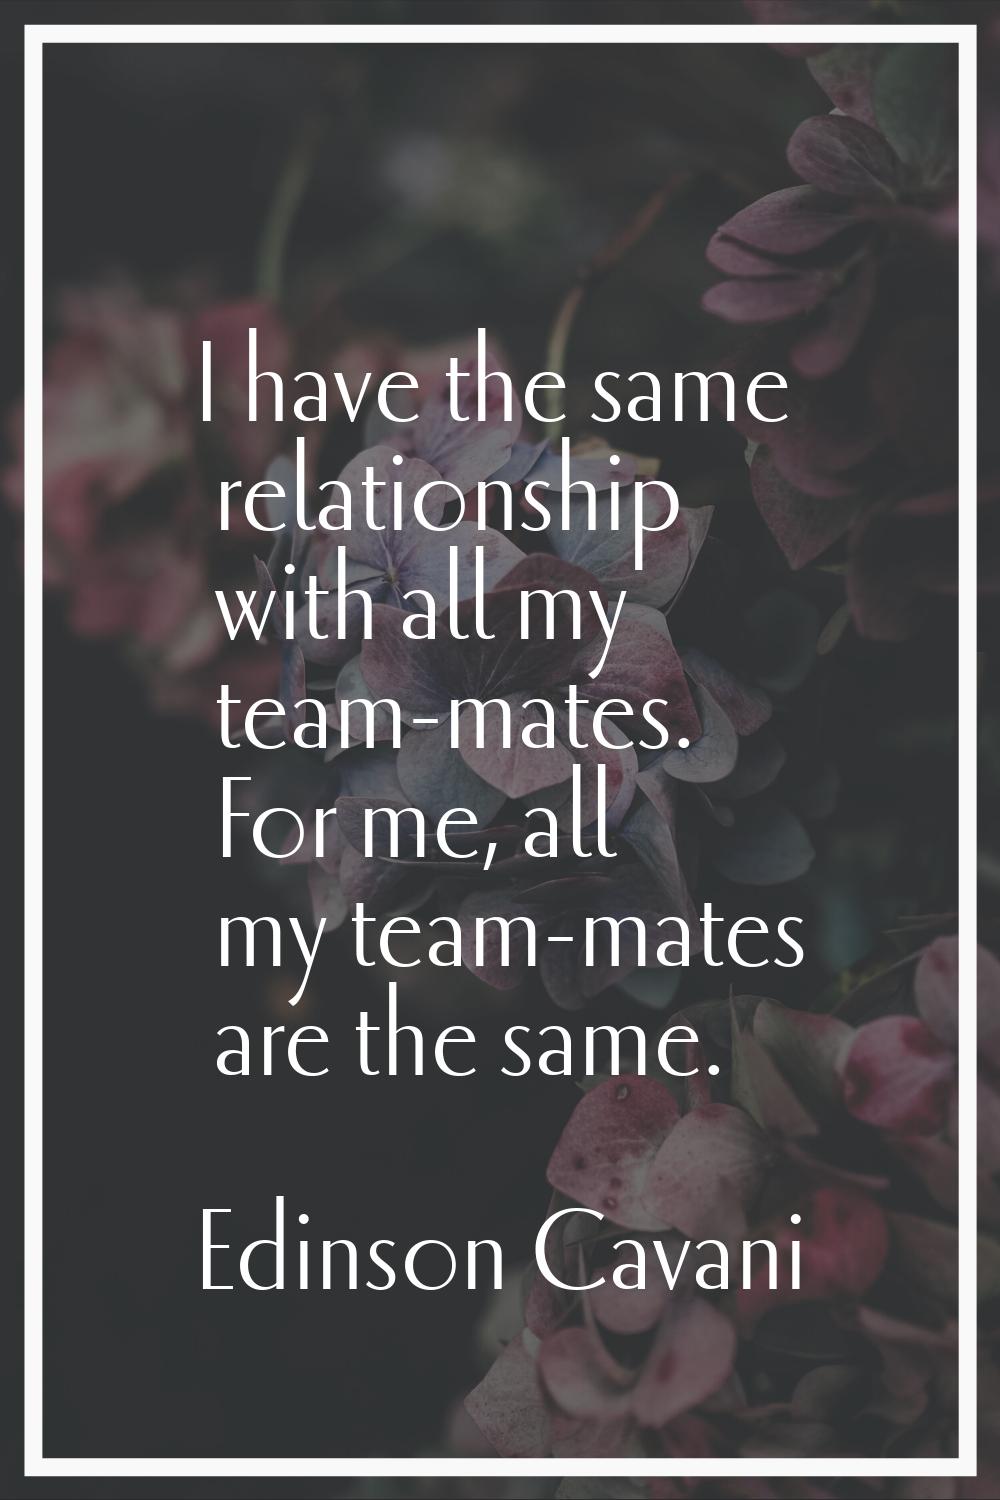 I have the same relationship with all my team-mates. For me, all my team-mates are the same.